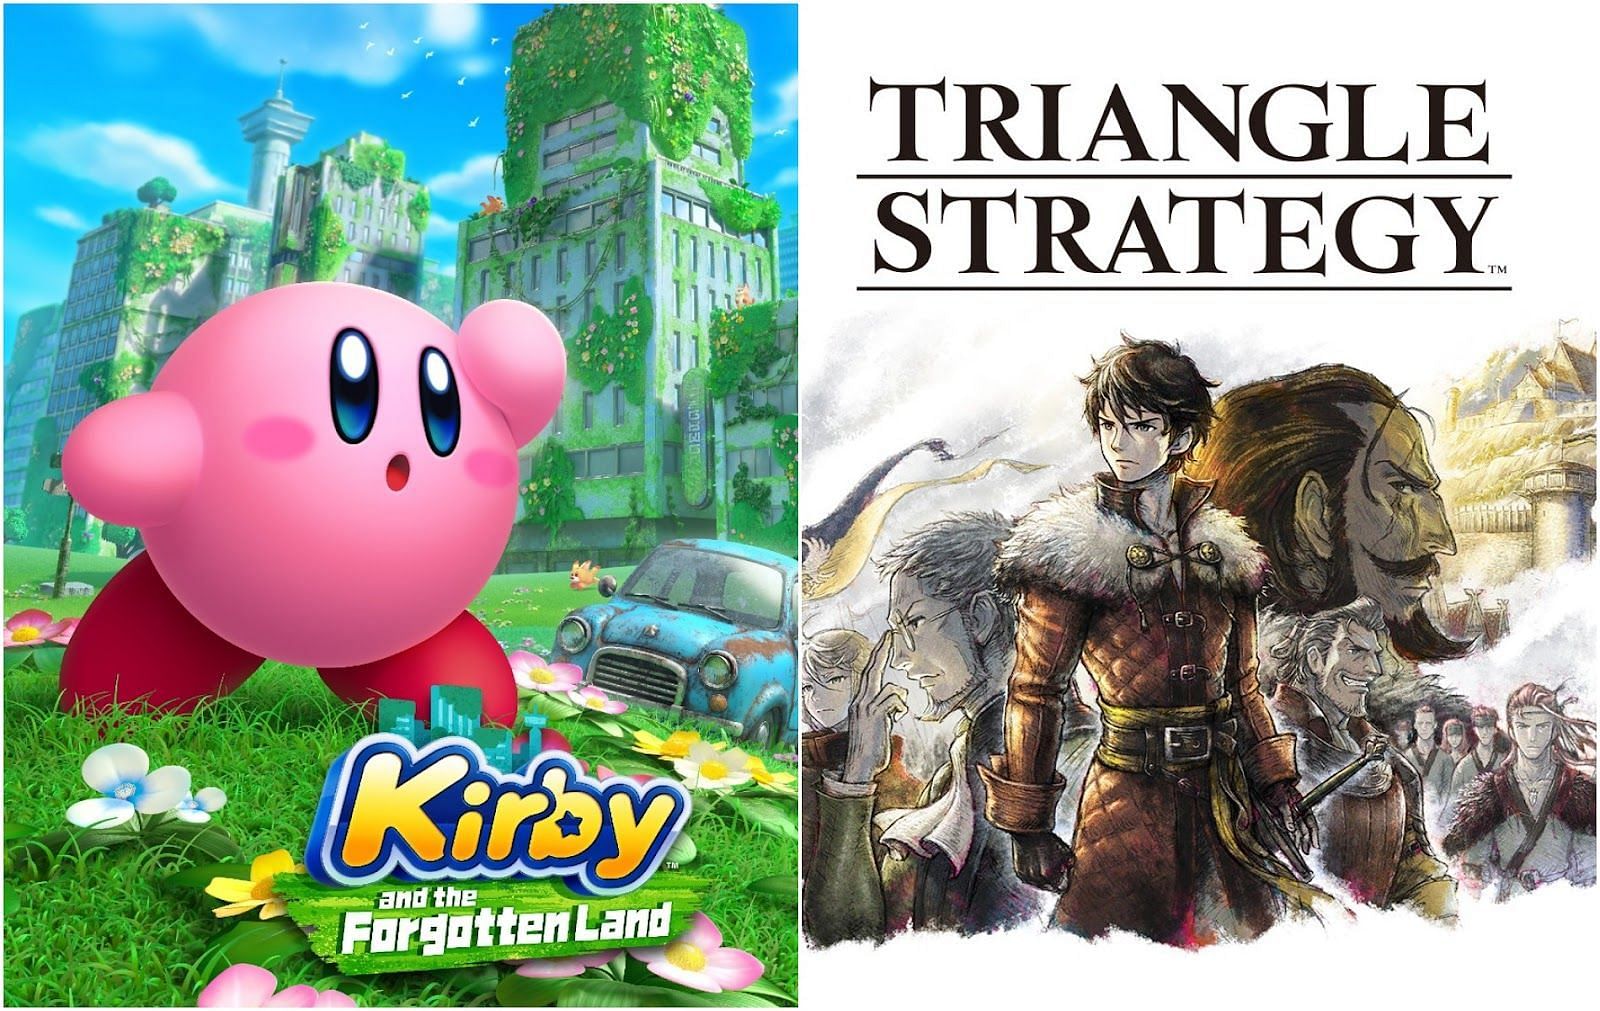 Kirby&#039;s Forgotten Land and Triangle Strategy are coming to Switch in March (image by Nintendo and Square Enix)